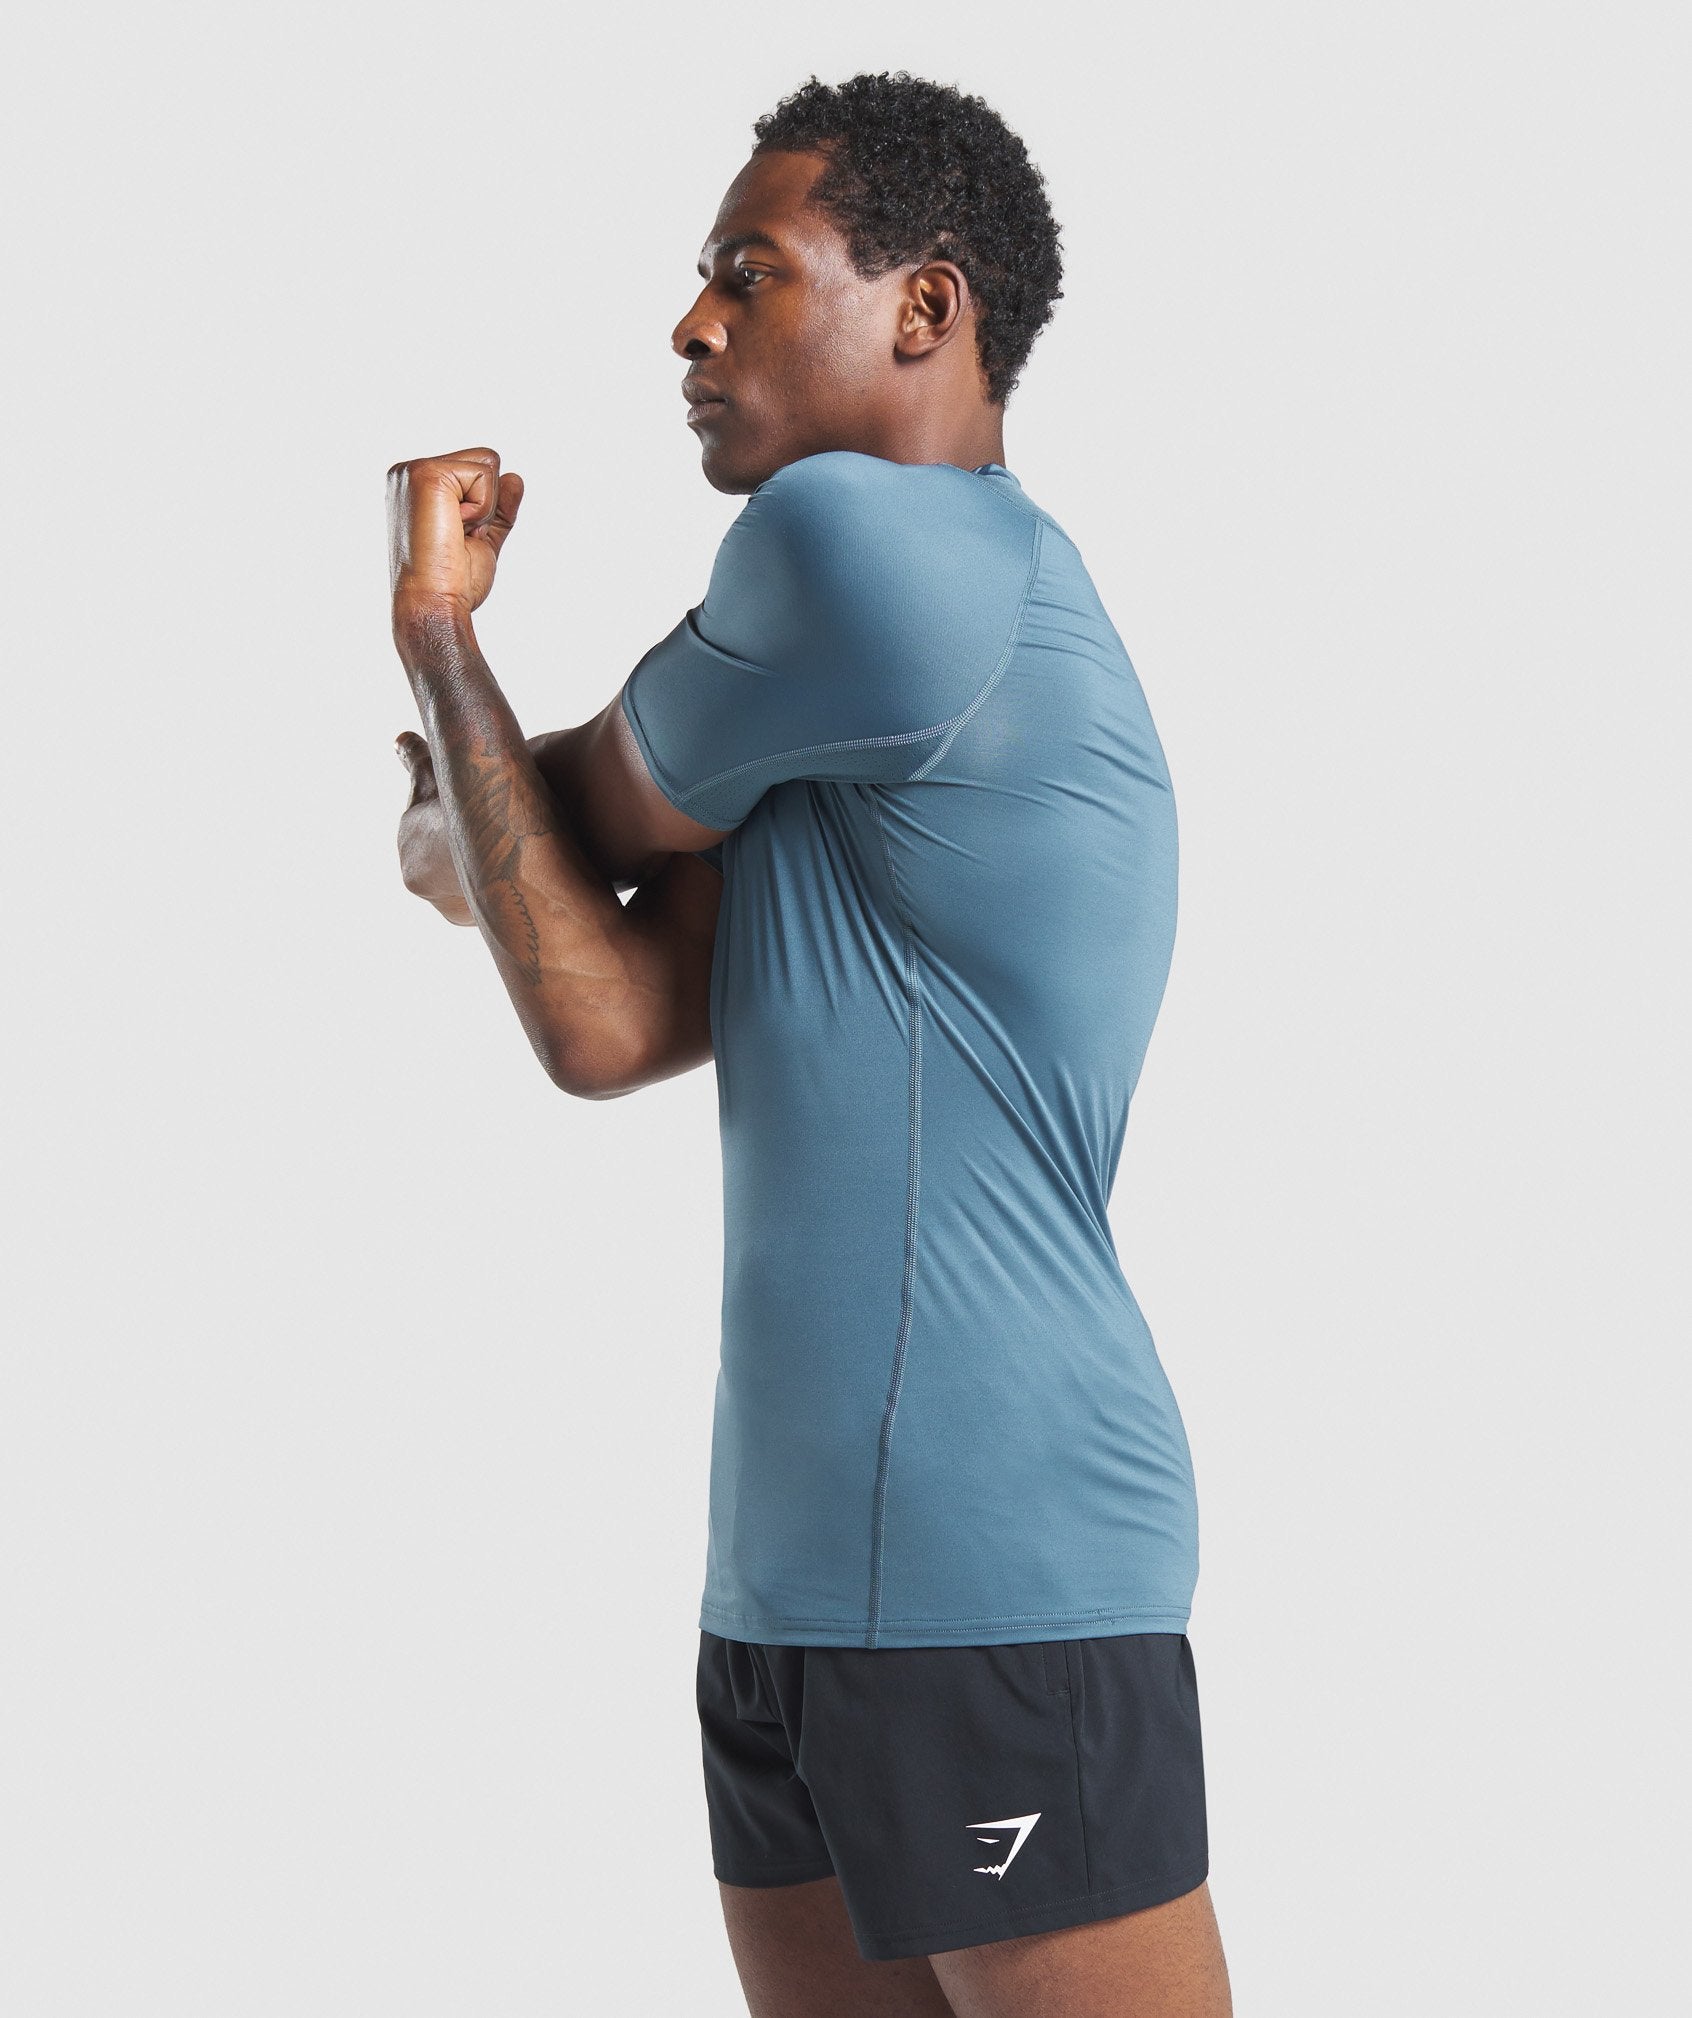 Element Baselayer T-Shirt in Teal - view 4